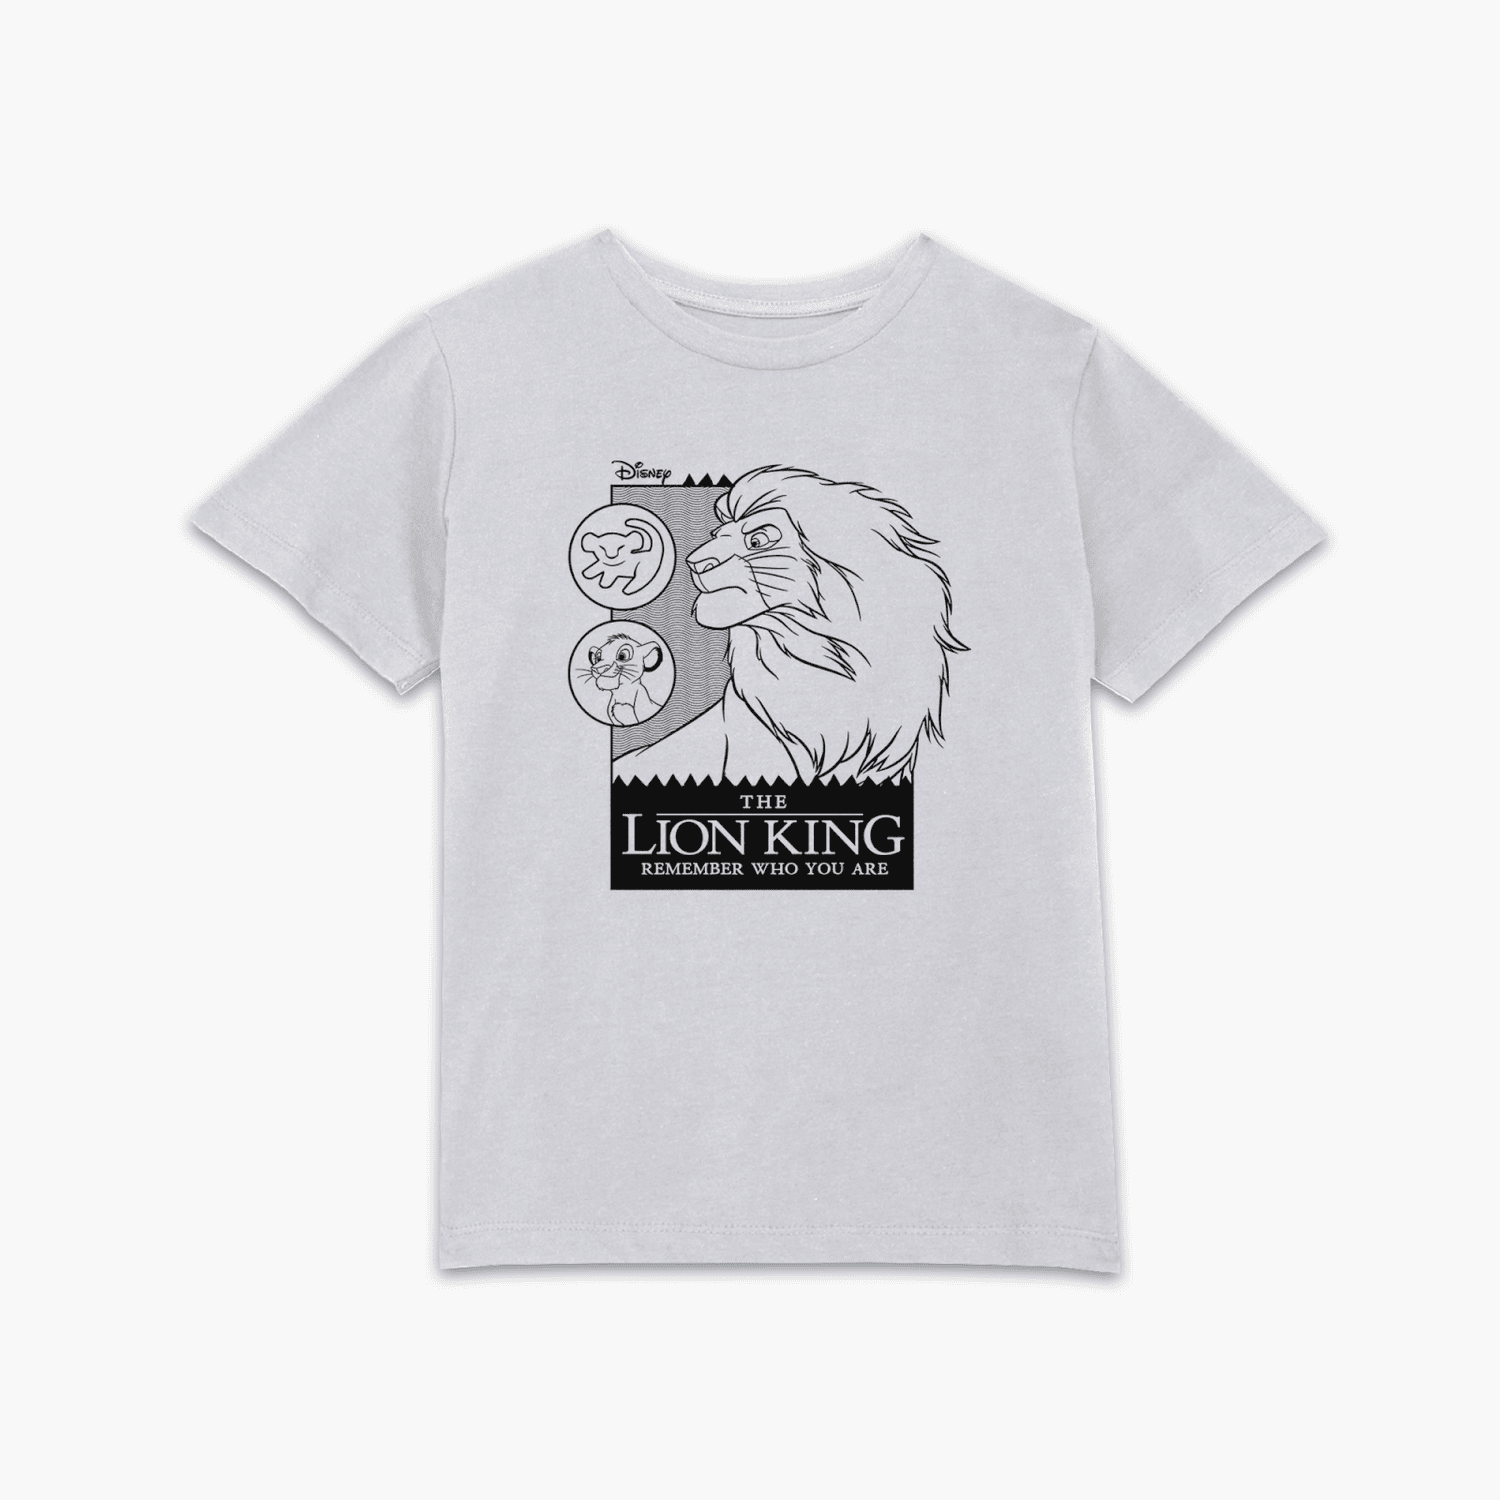 Lion King Remember Who You Are Kids' T-Shirt - White